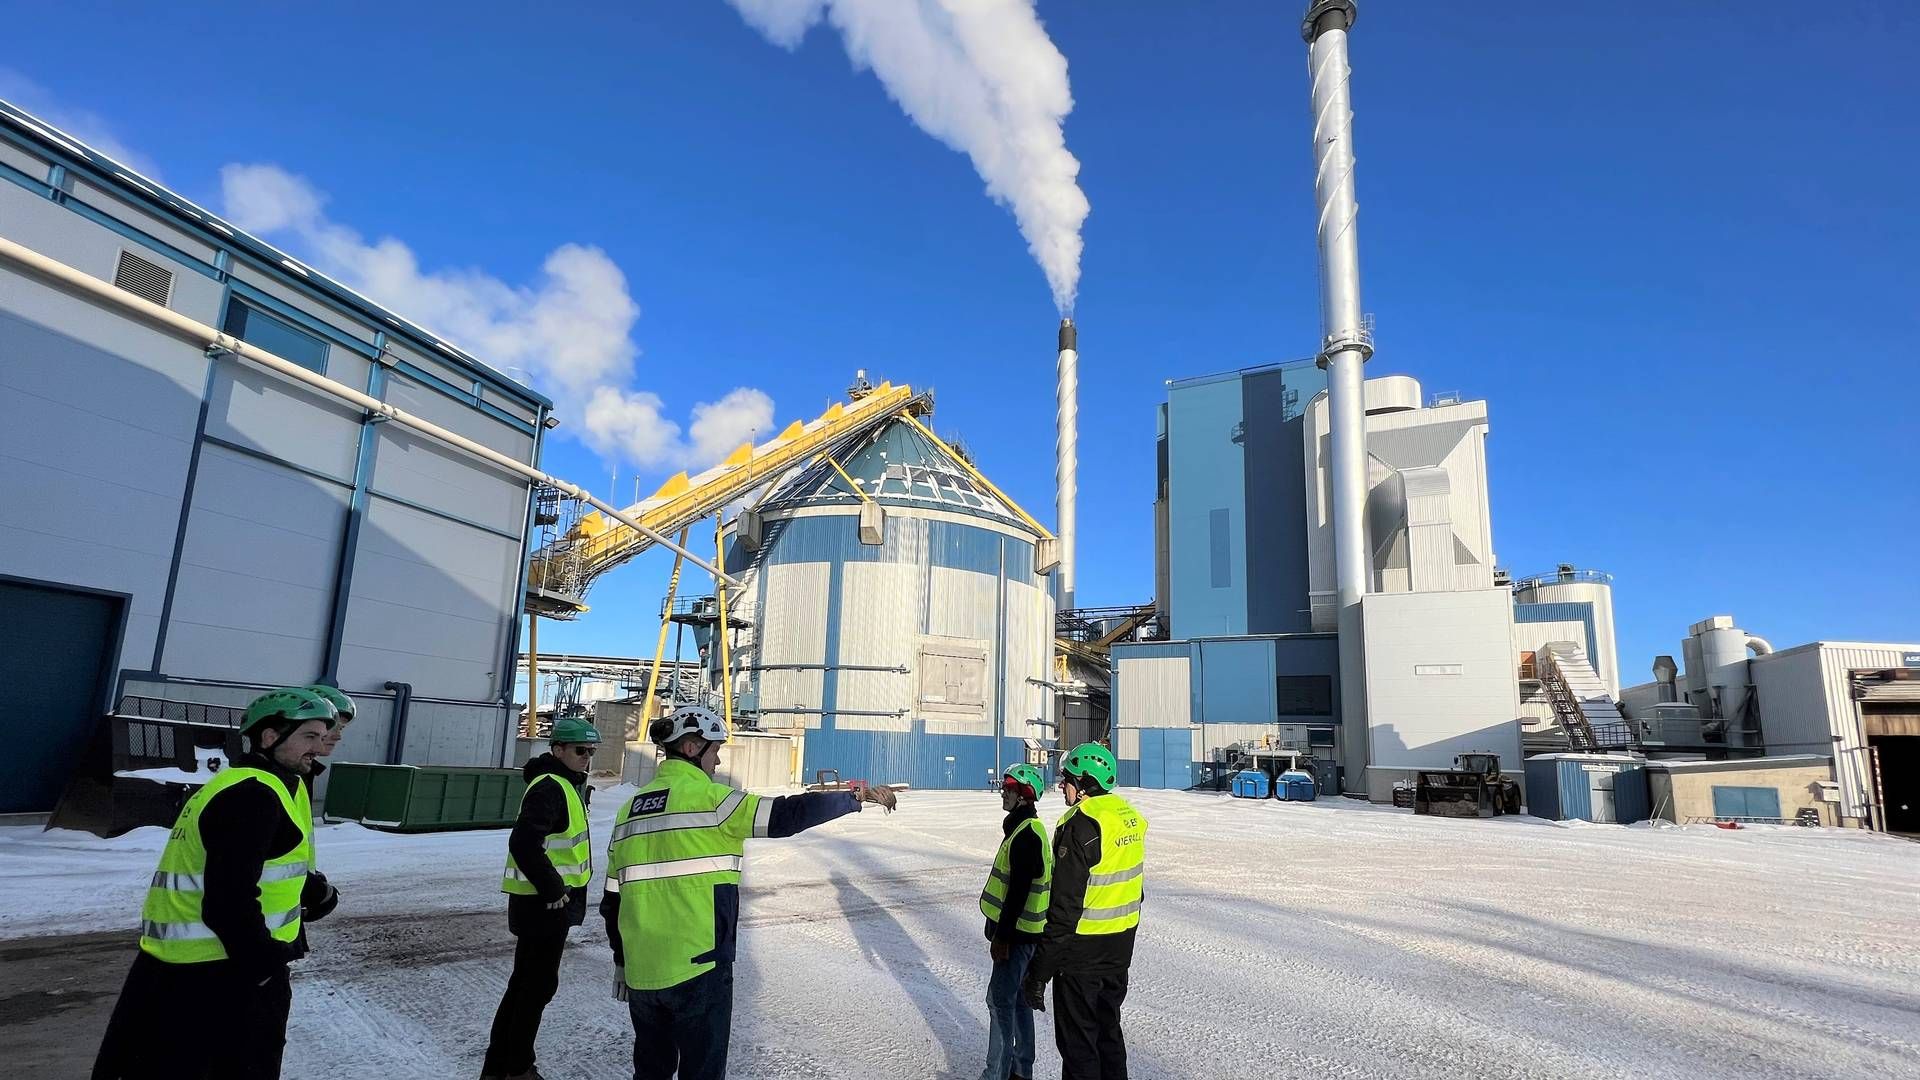 ”When we get into core assets, both the cost and risk are lower than doing it through funds," says Industrien's Head of Real Assets, Jan Østergaard. | Photo: Industriens Pension